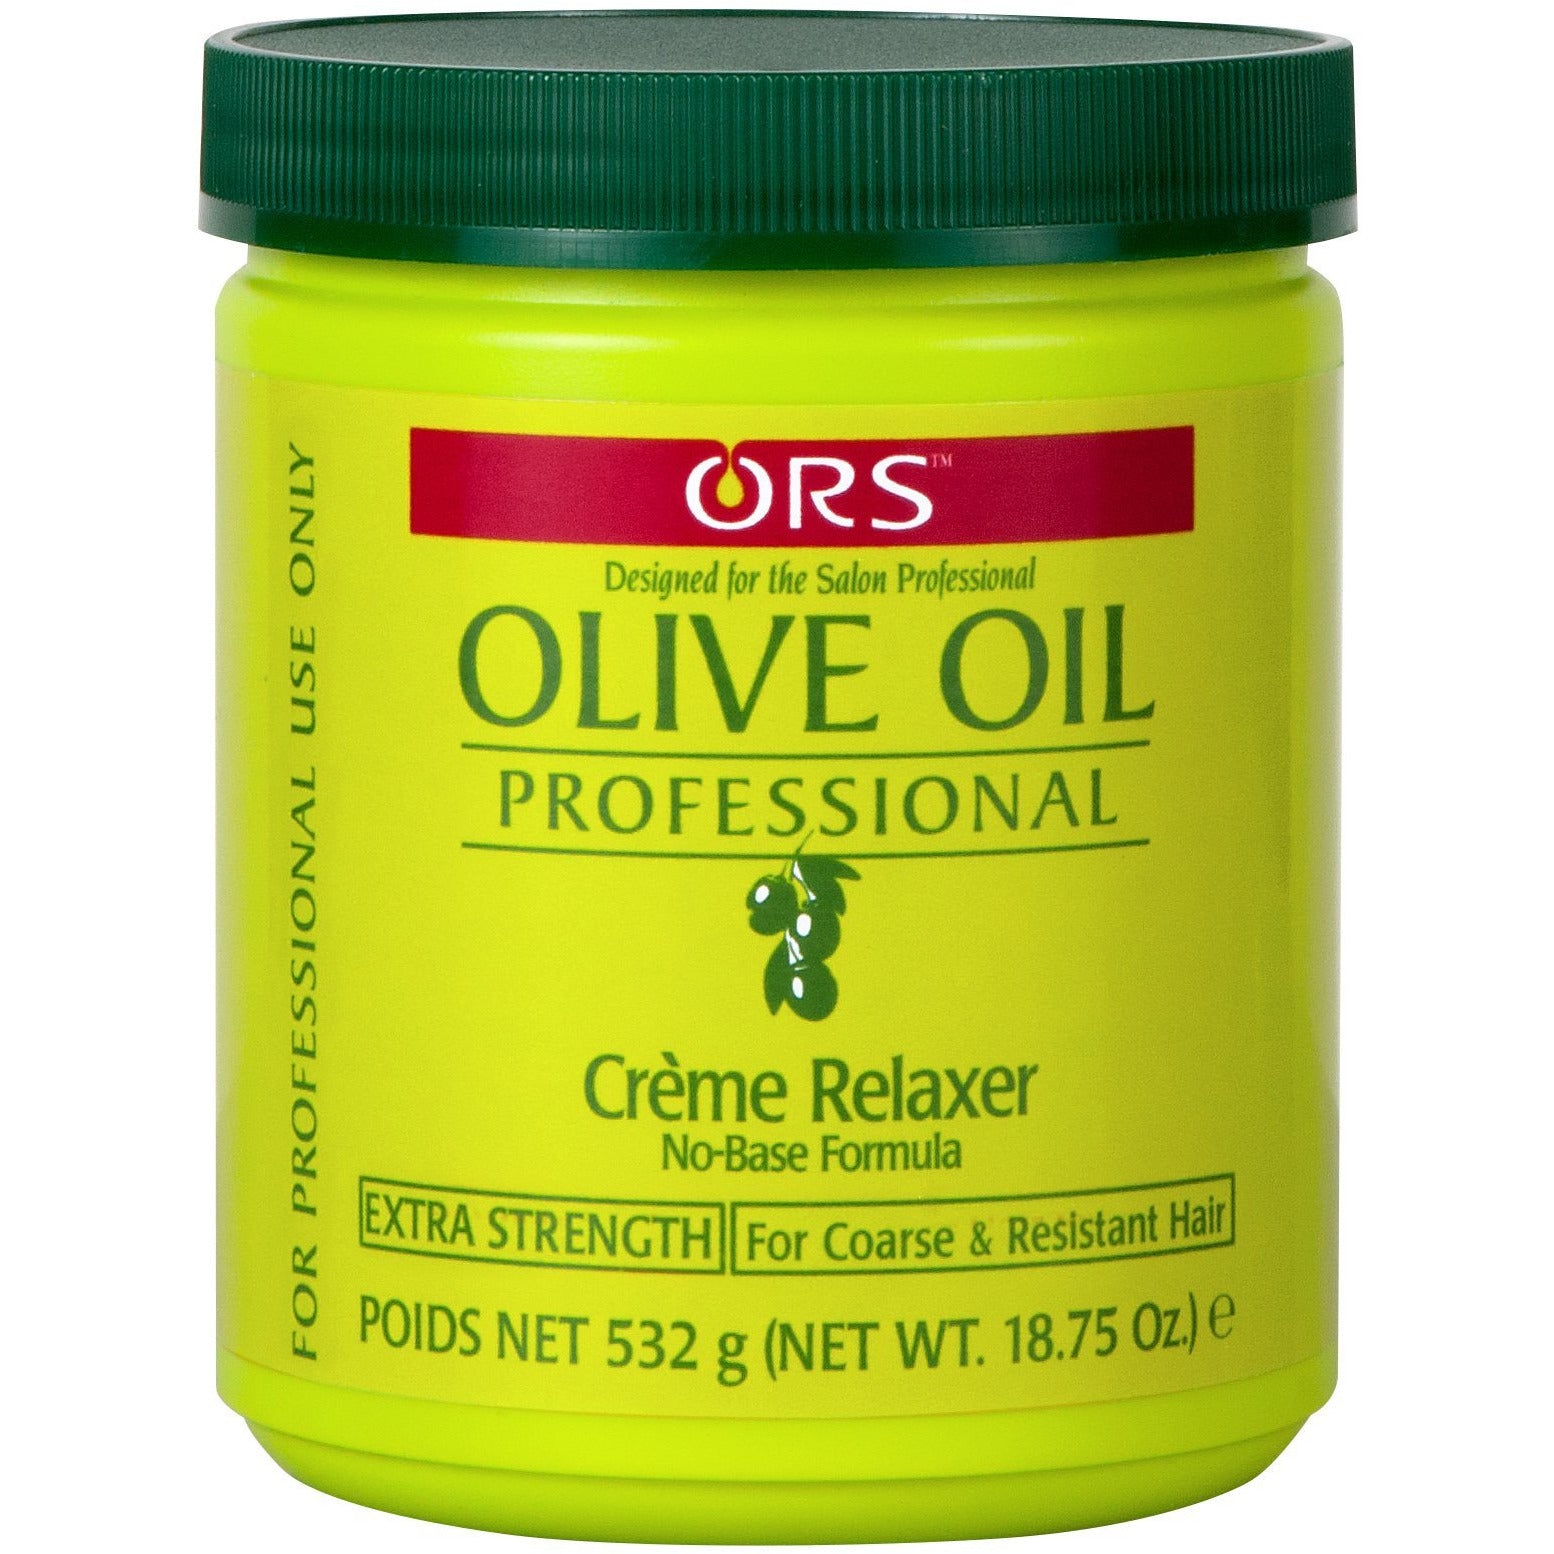 4th Ave Market: Organic Root Stimulator Olive Oil Professional Creme Relaxer, Extra Strength, 531 gr